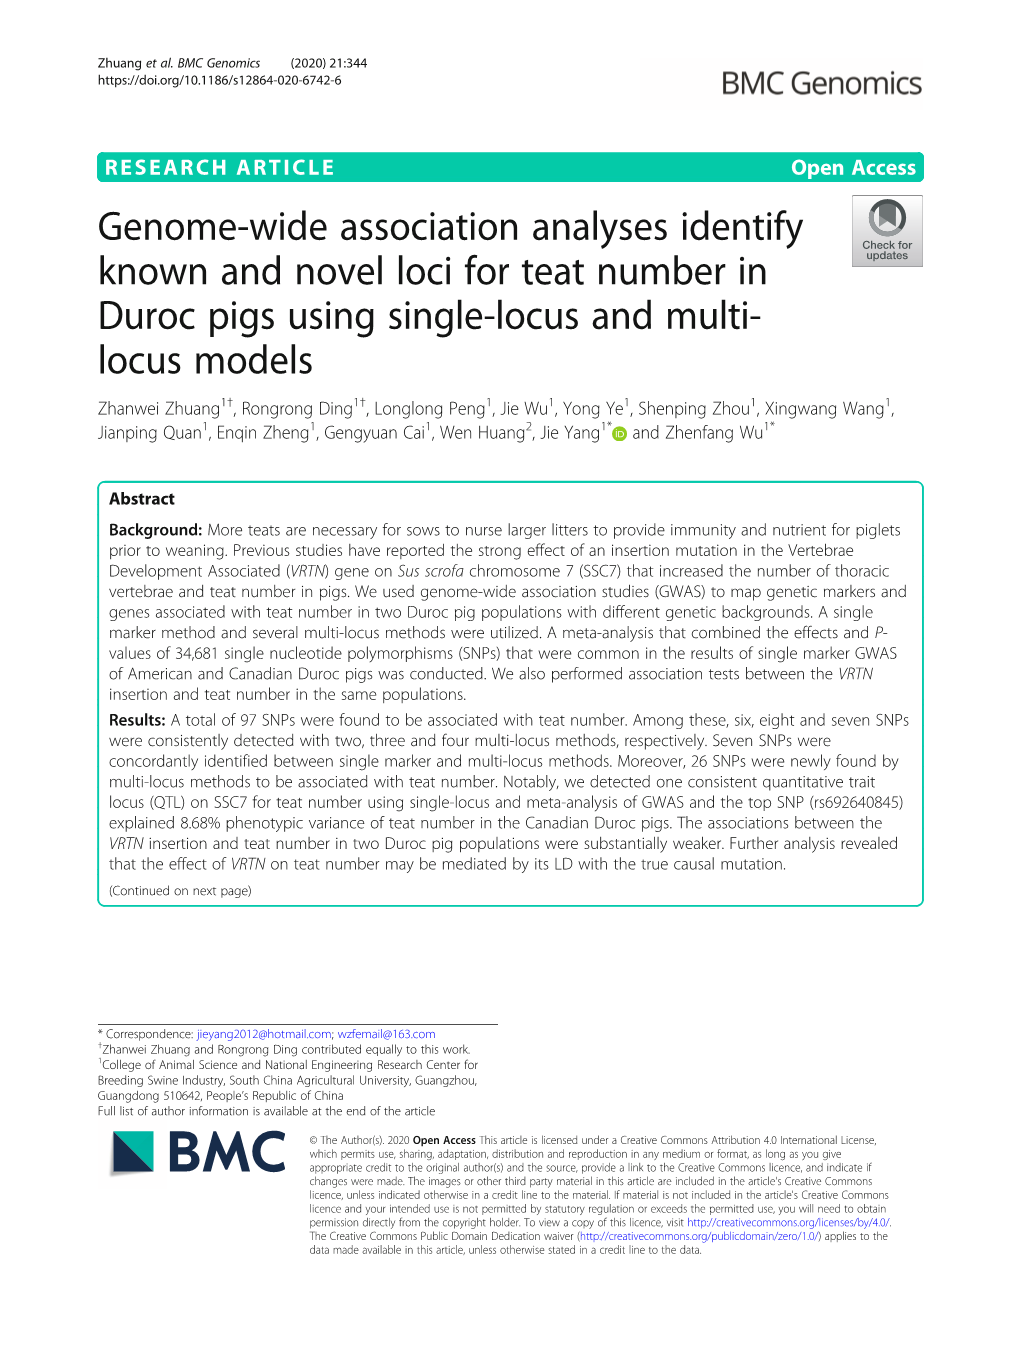 Genome-Wide Association Analyses Identify Known and Novel Loci For